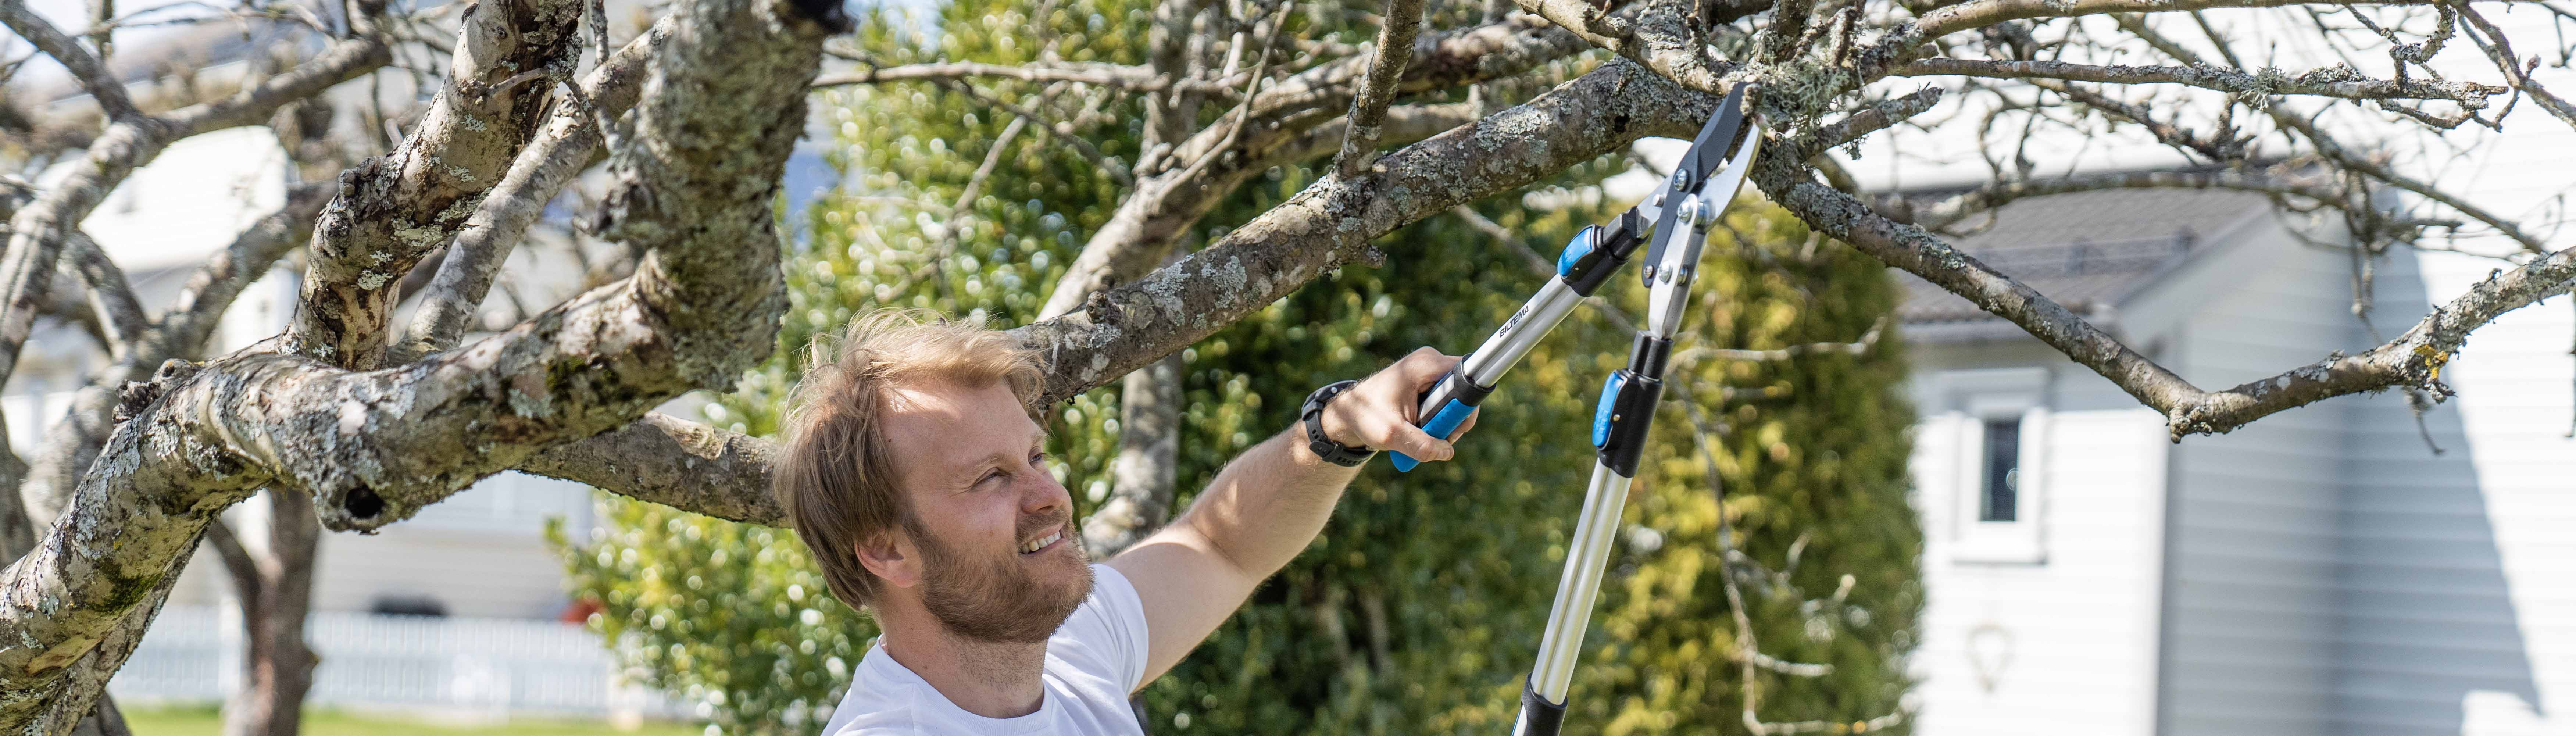 Pruning Fruit Trees, Flowers and Shrubs